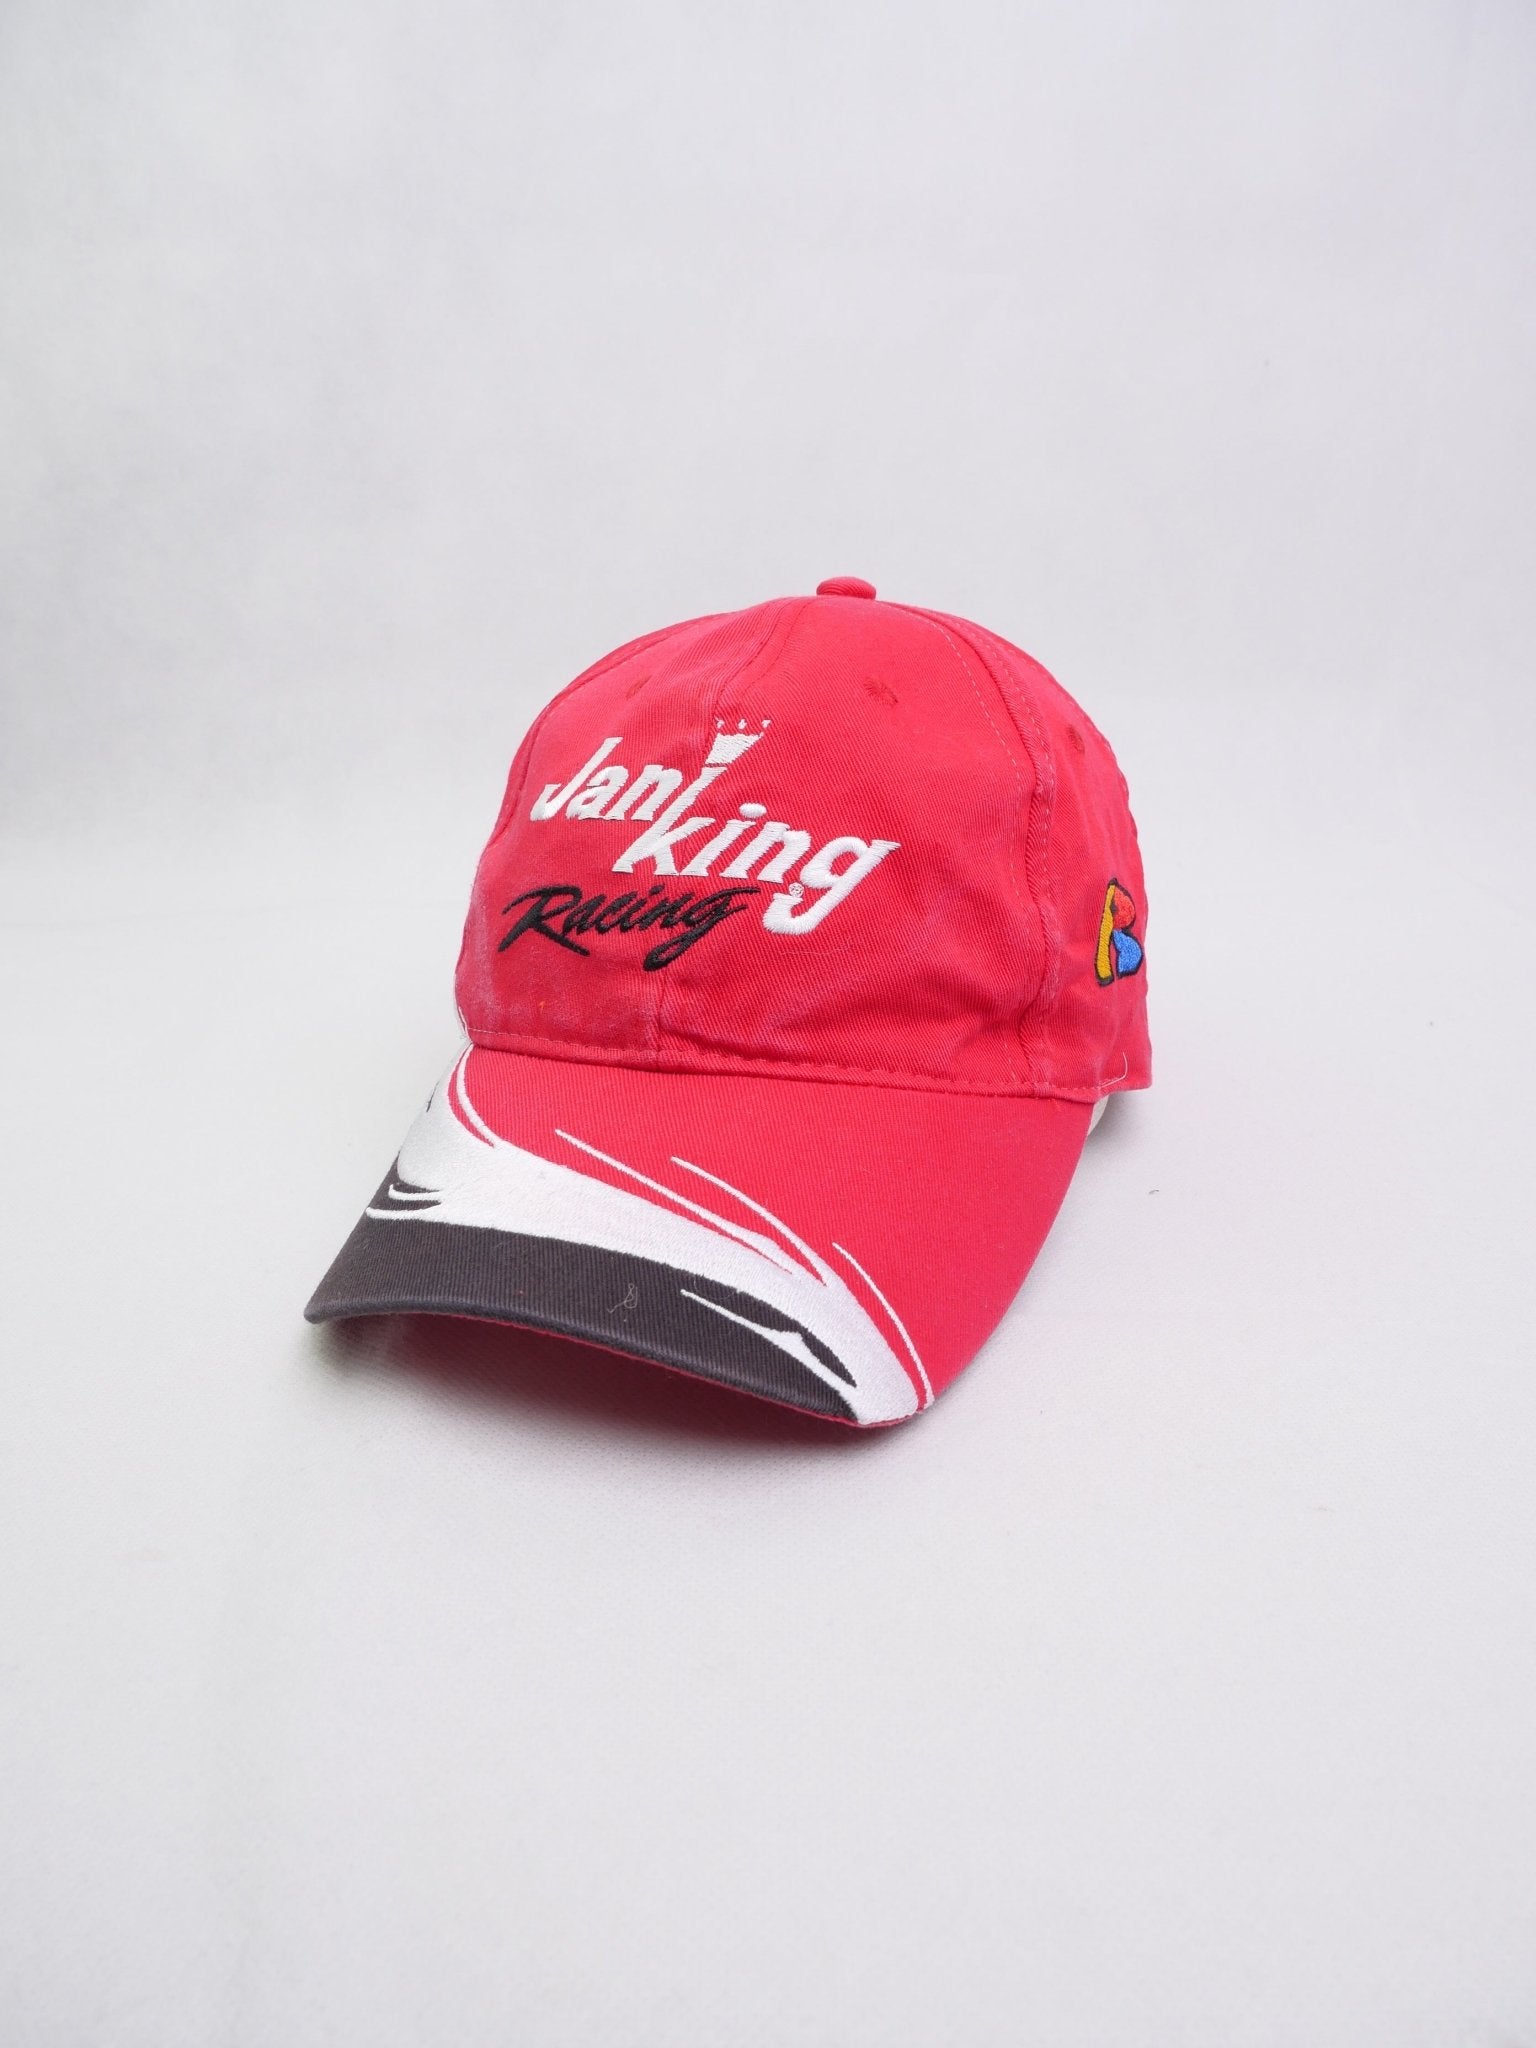 Jan King Racing embroidered Logo Cap Accessoire - Peeces